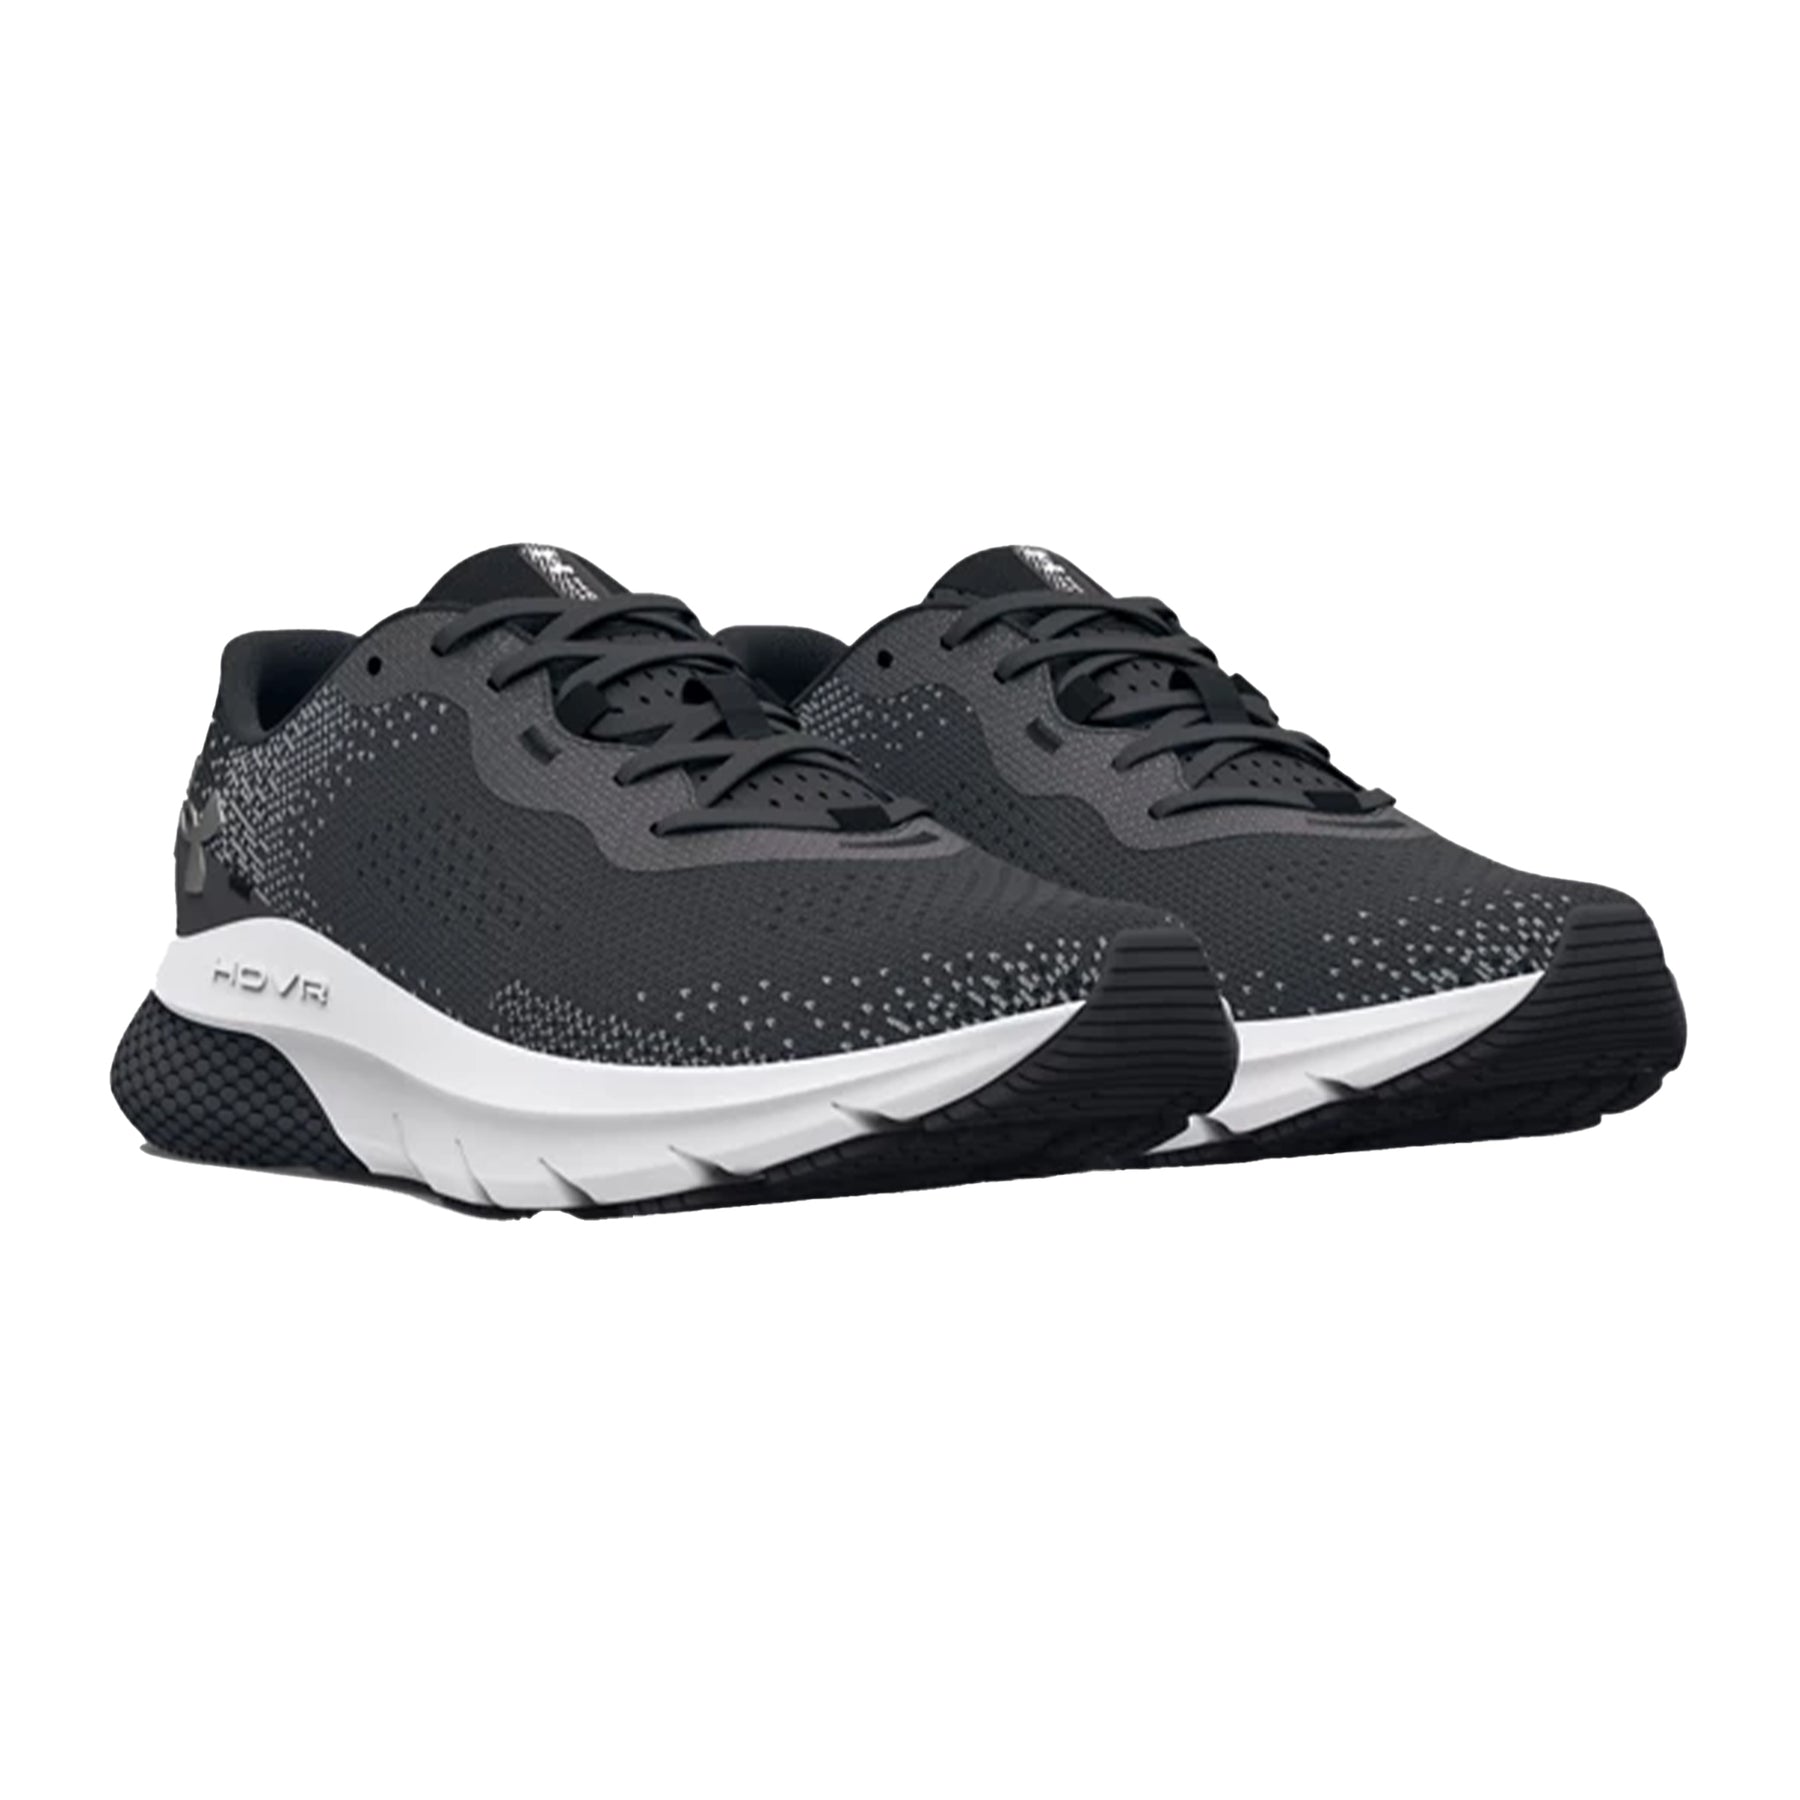 Under Armour HOVR Turbulence 2 Kids Running Shoes: Jet Grey/Metalic Silver